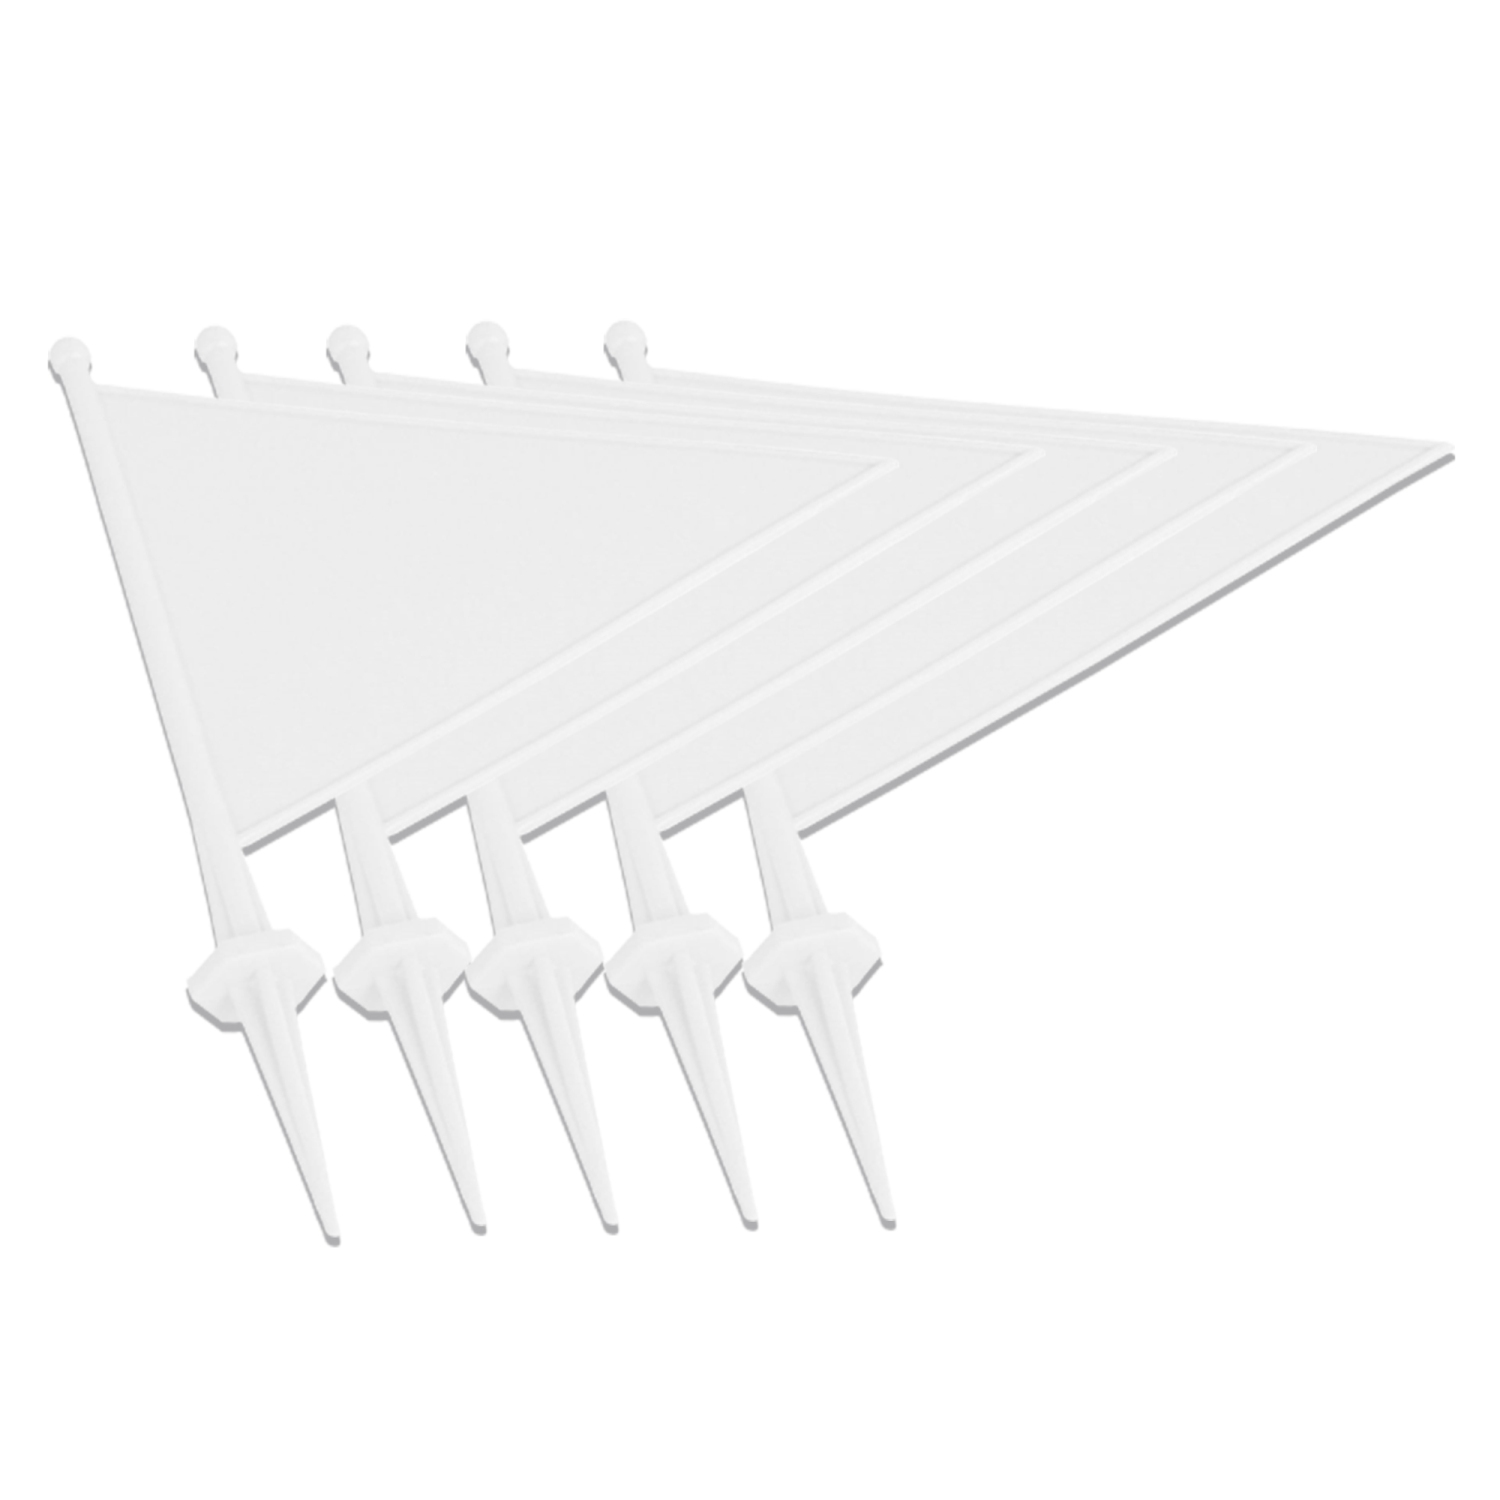 PRISP Plastic Field Marking Flag - Flag With Spike for Outdoor Marking, Set of 5